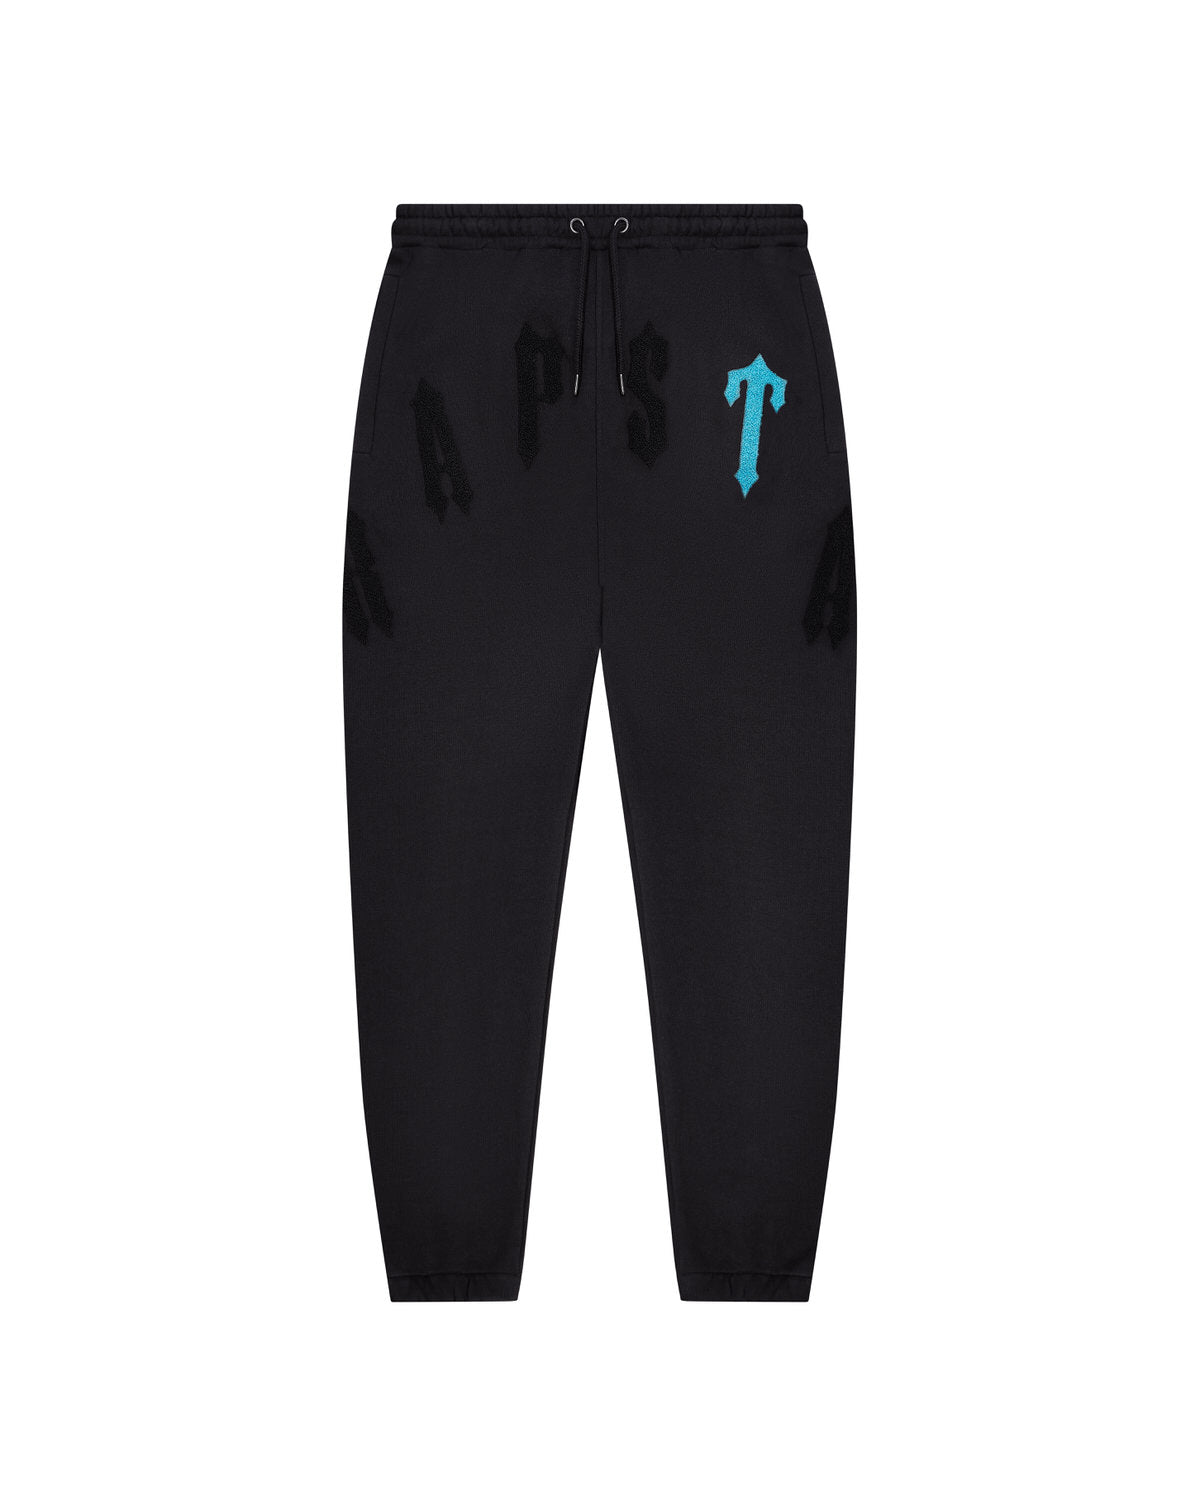 Irongate Arch Chenille 2.0 Tracksuit - Black/Blue